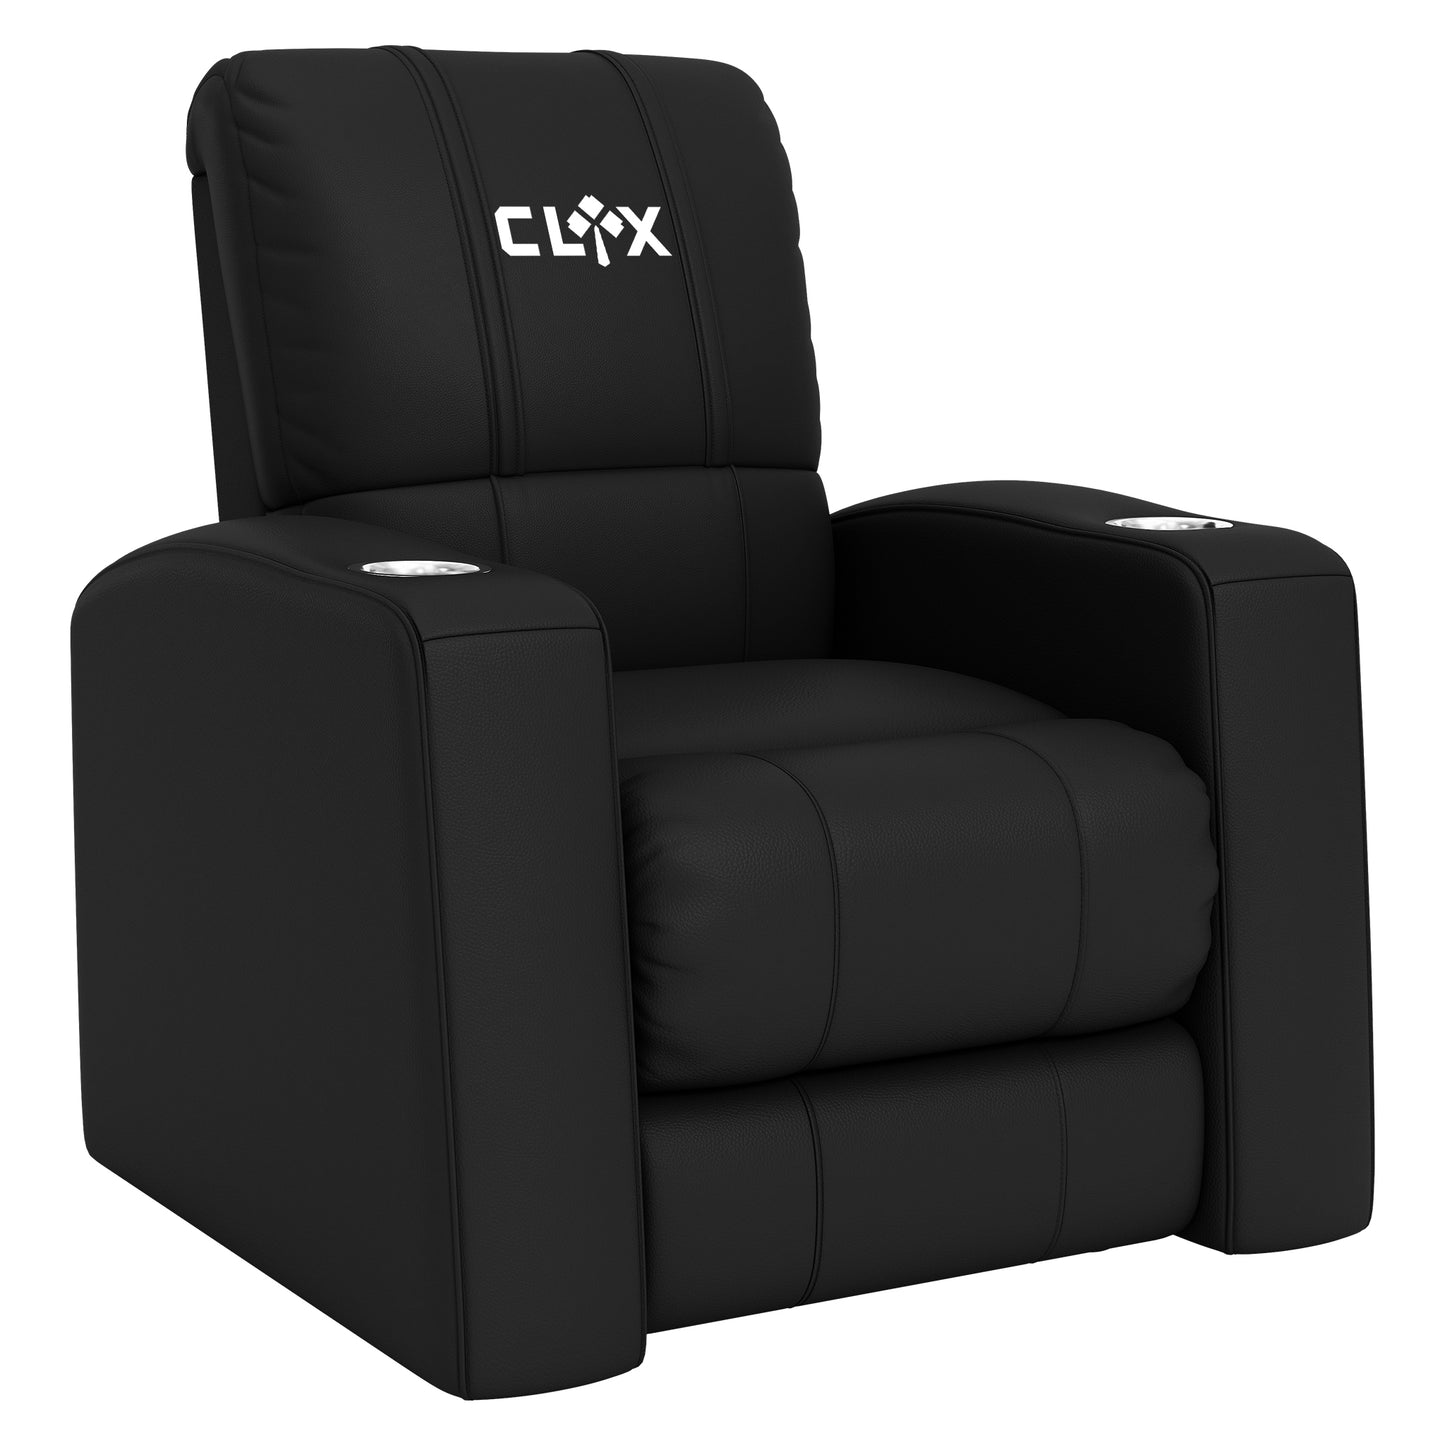 Relax Home Theater Recliner with Celtics Crossover Gaming Wordmark White [CAN ONLY BE SHIPPED TO MASSACHUSETTS]